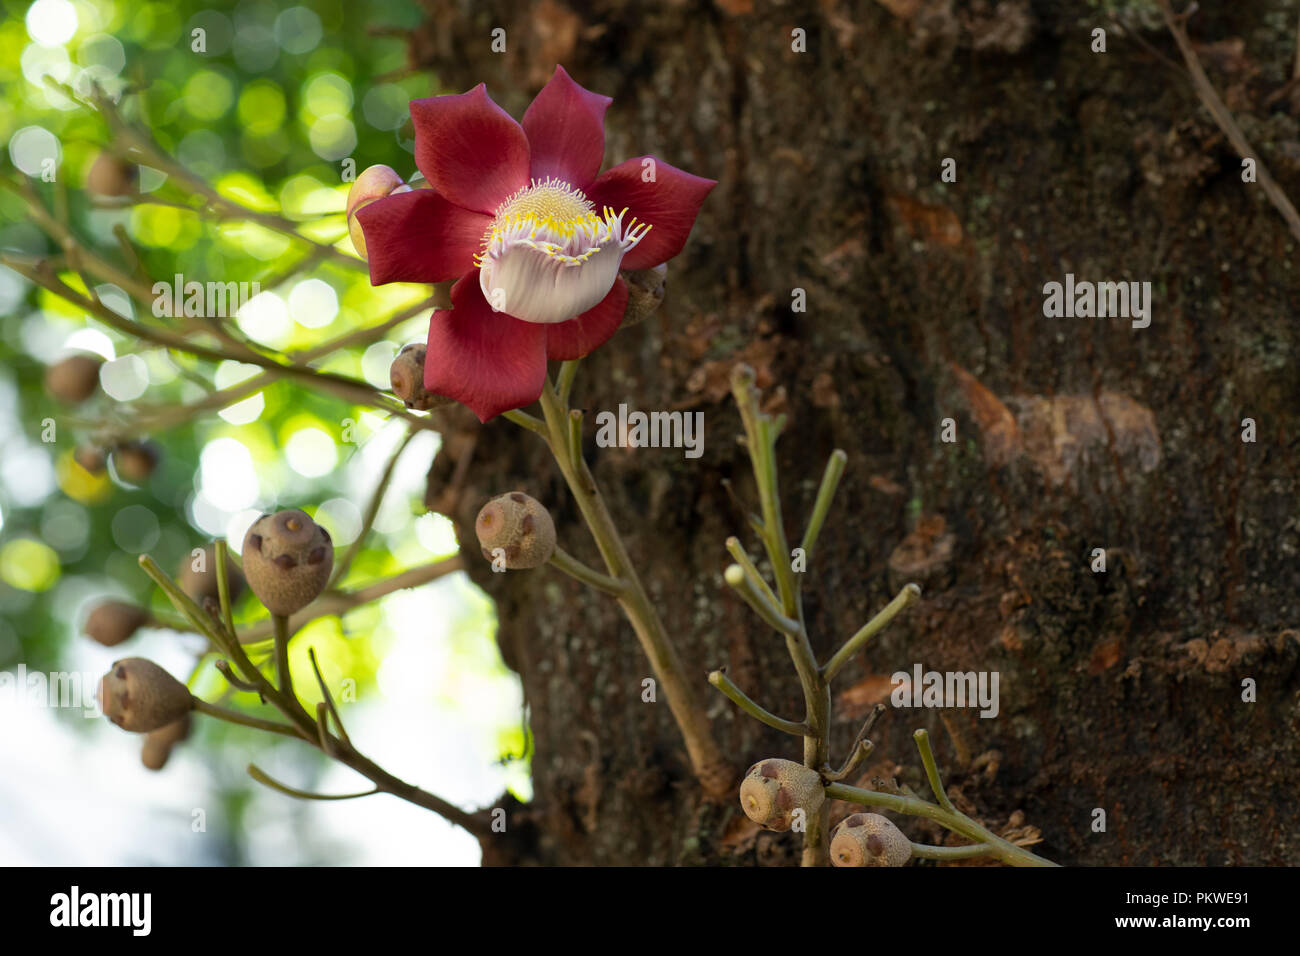 Couroupita guianensis – Details. Flowers and exotic fruits. Common in landscaping of Rio de Janeiro, Brazil. Stock Photo